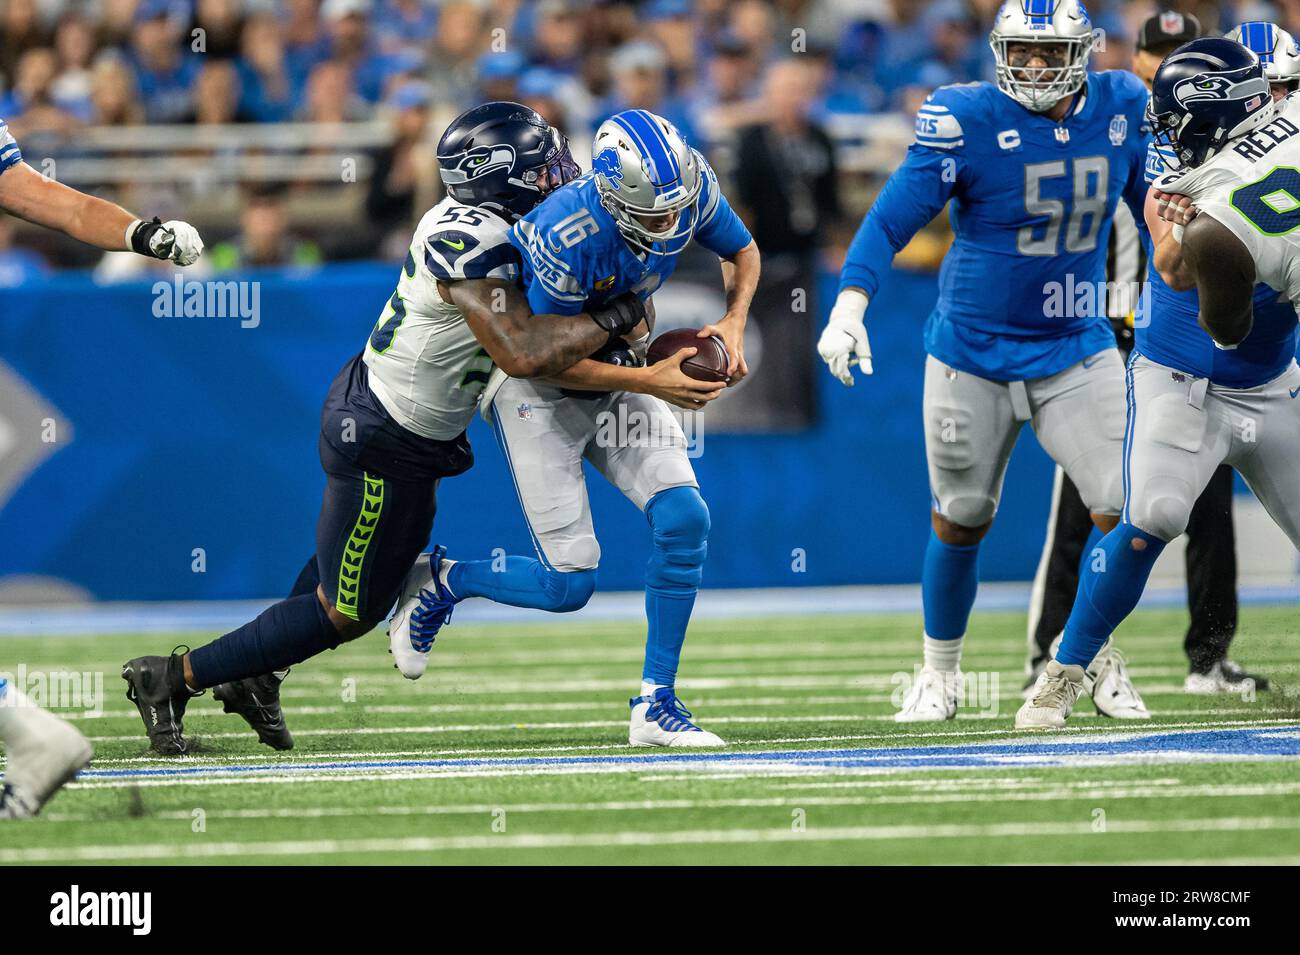 DETROIT, MI - SEPTEMBER 17: Seattle Seahawks Defensive End (55) Dre'Mont Jones gets a hold of a scrambling Detroit Lions QB (16) Jared Goff during the game between Seattle Seahawks and Detroit Lions on September 17, 2023 at Ford Field in Detroit, MI (Photo by Allan Dranberg/CSM) Credit: Cal Sport Media/Alamy Live News Stock Photo